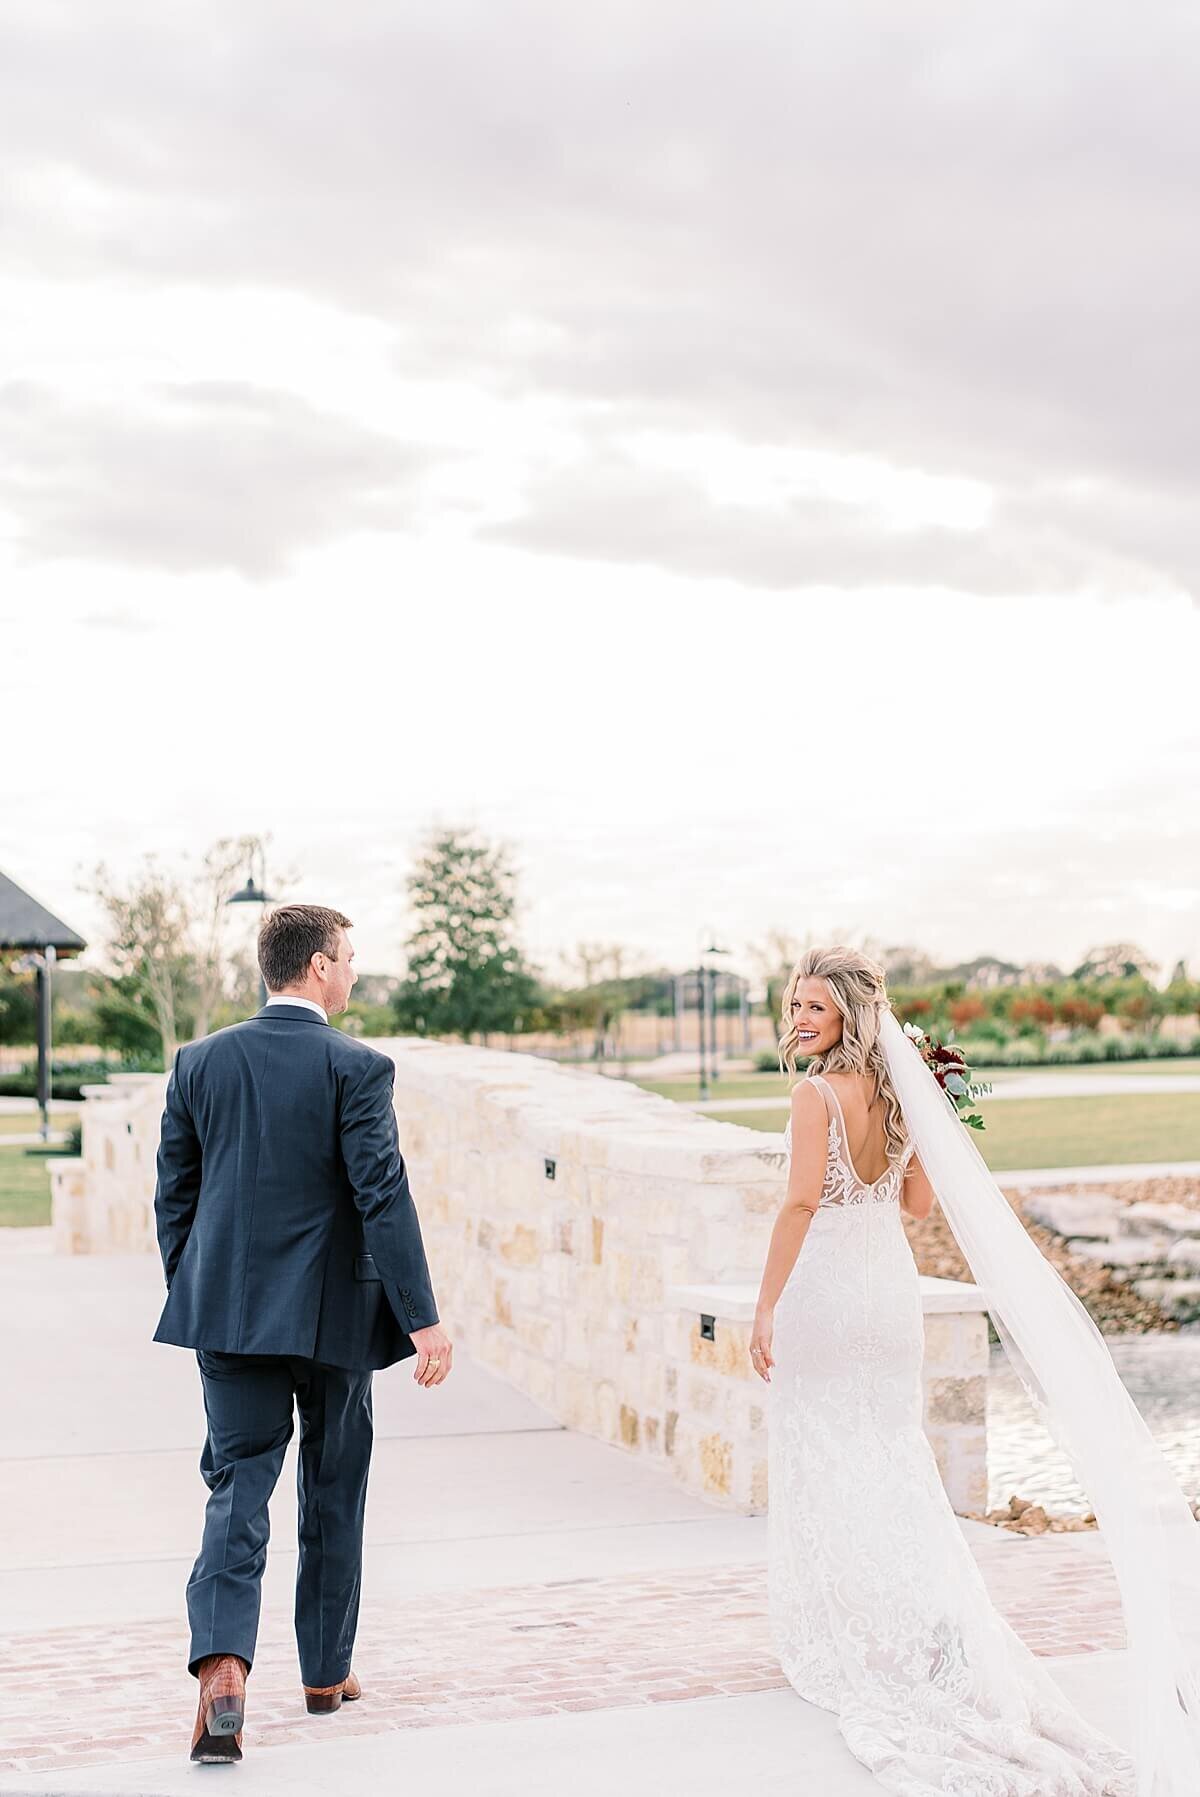 Outdoor Wedding Ceremony at the Weinberg at Wixon Valley in Bryan, Texas photographed by Alicia Yarrish Photography